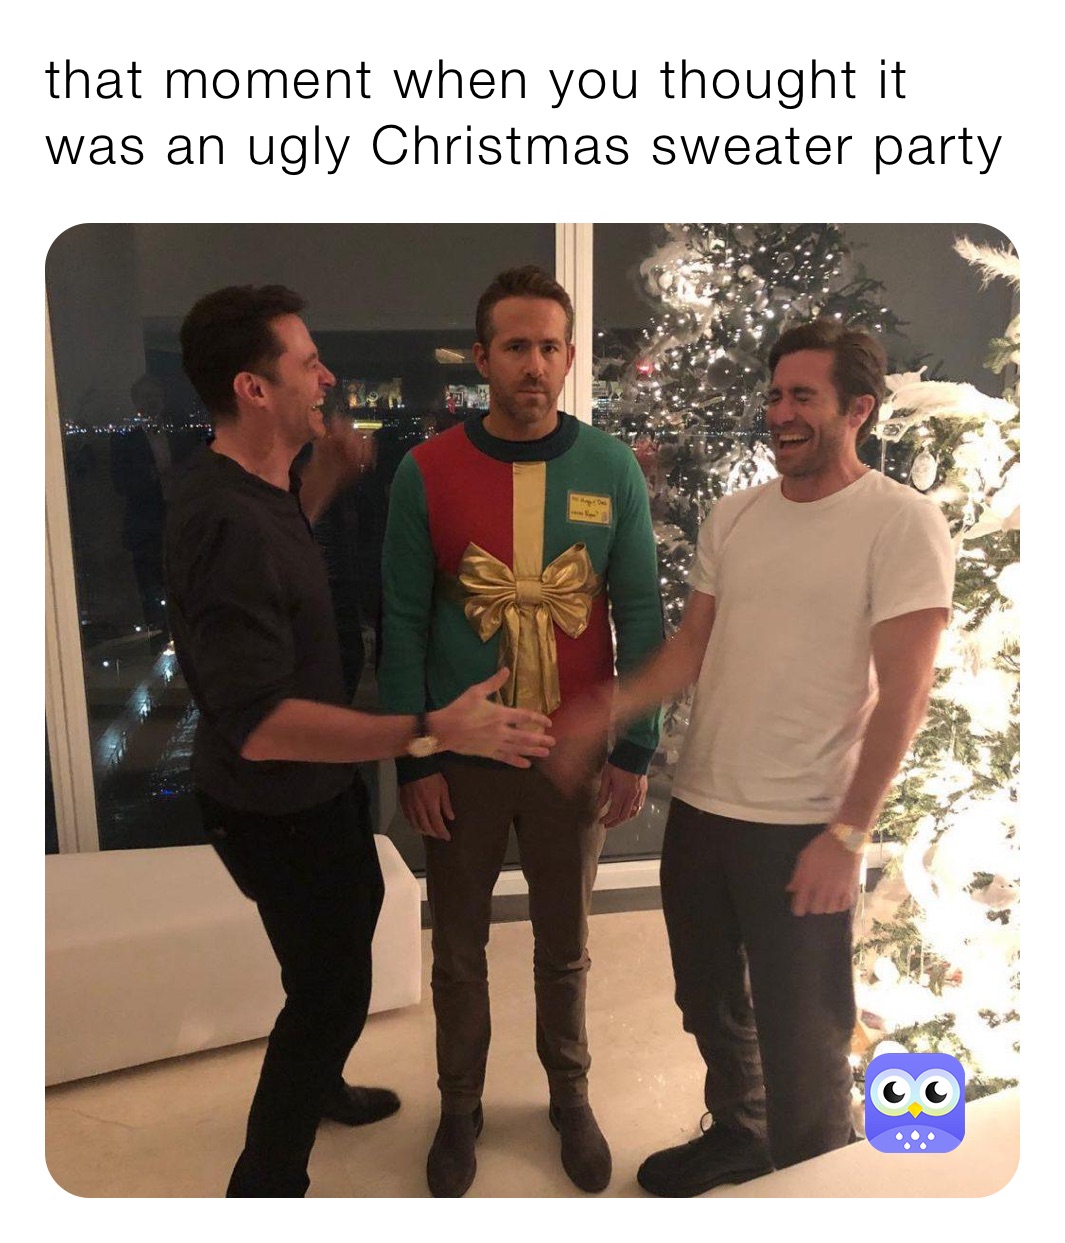 that moment when you thought it was an ugly Christmas sweater party